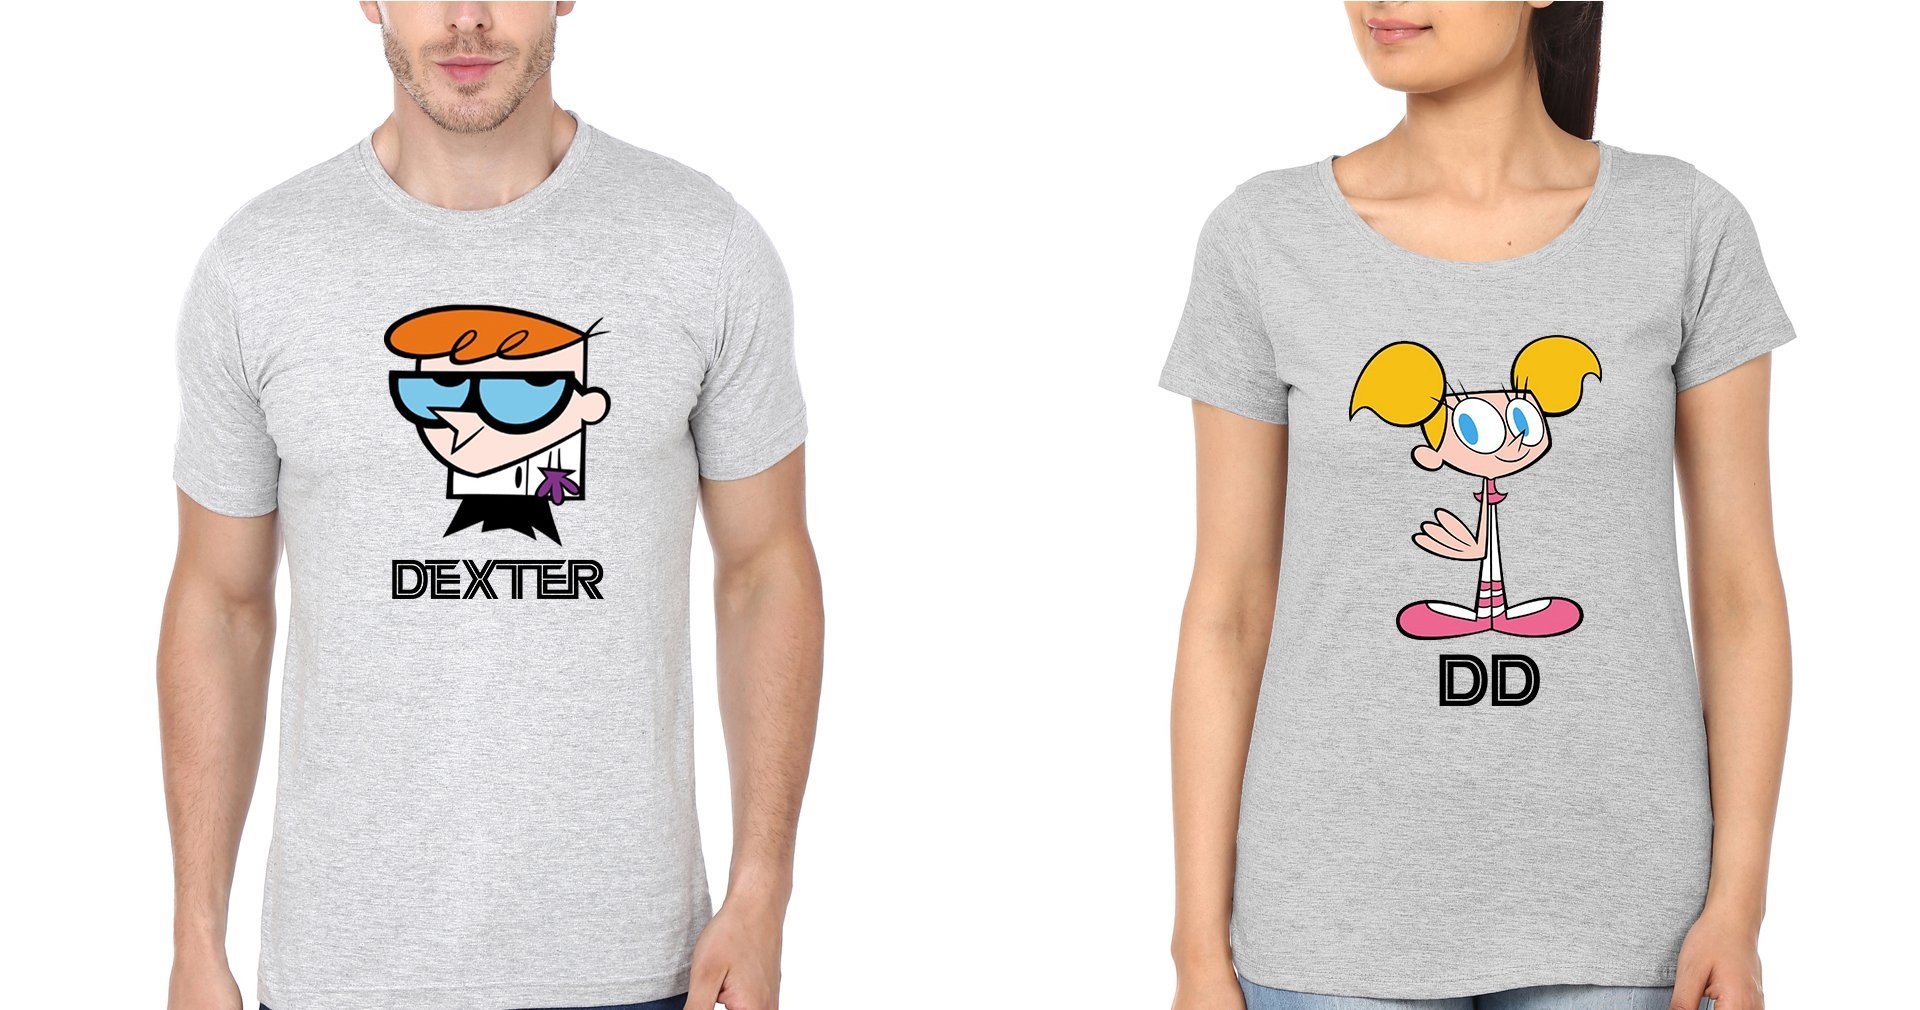 Dexter DD Brother and Sister Matching T-Shirts- FunkyTradition - FunkyTradition